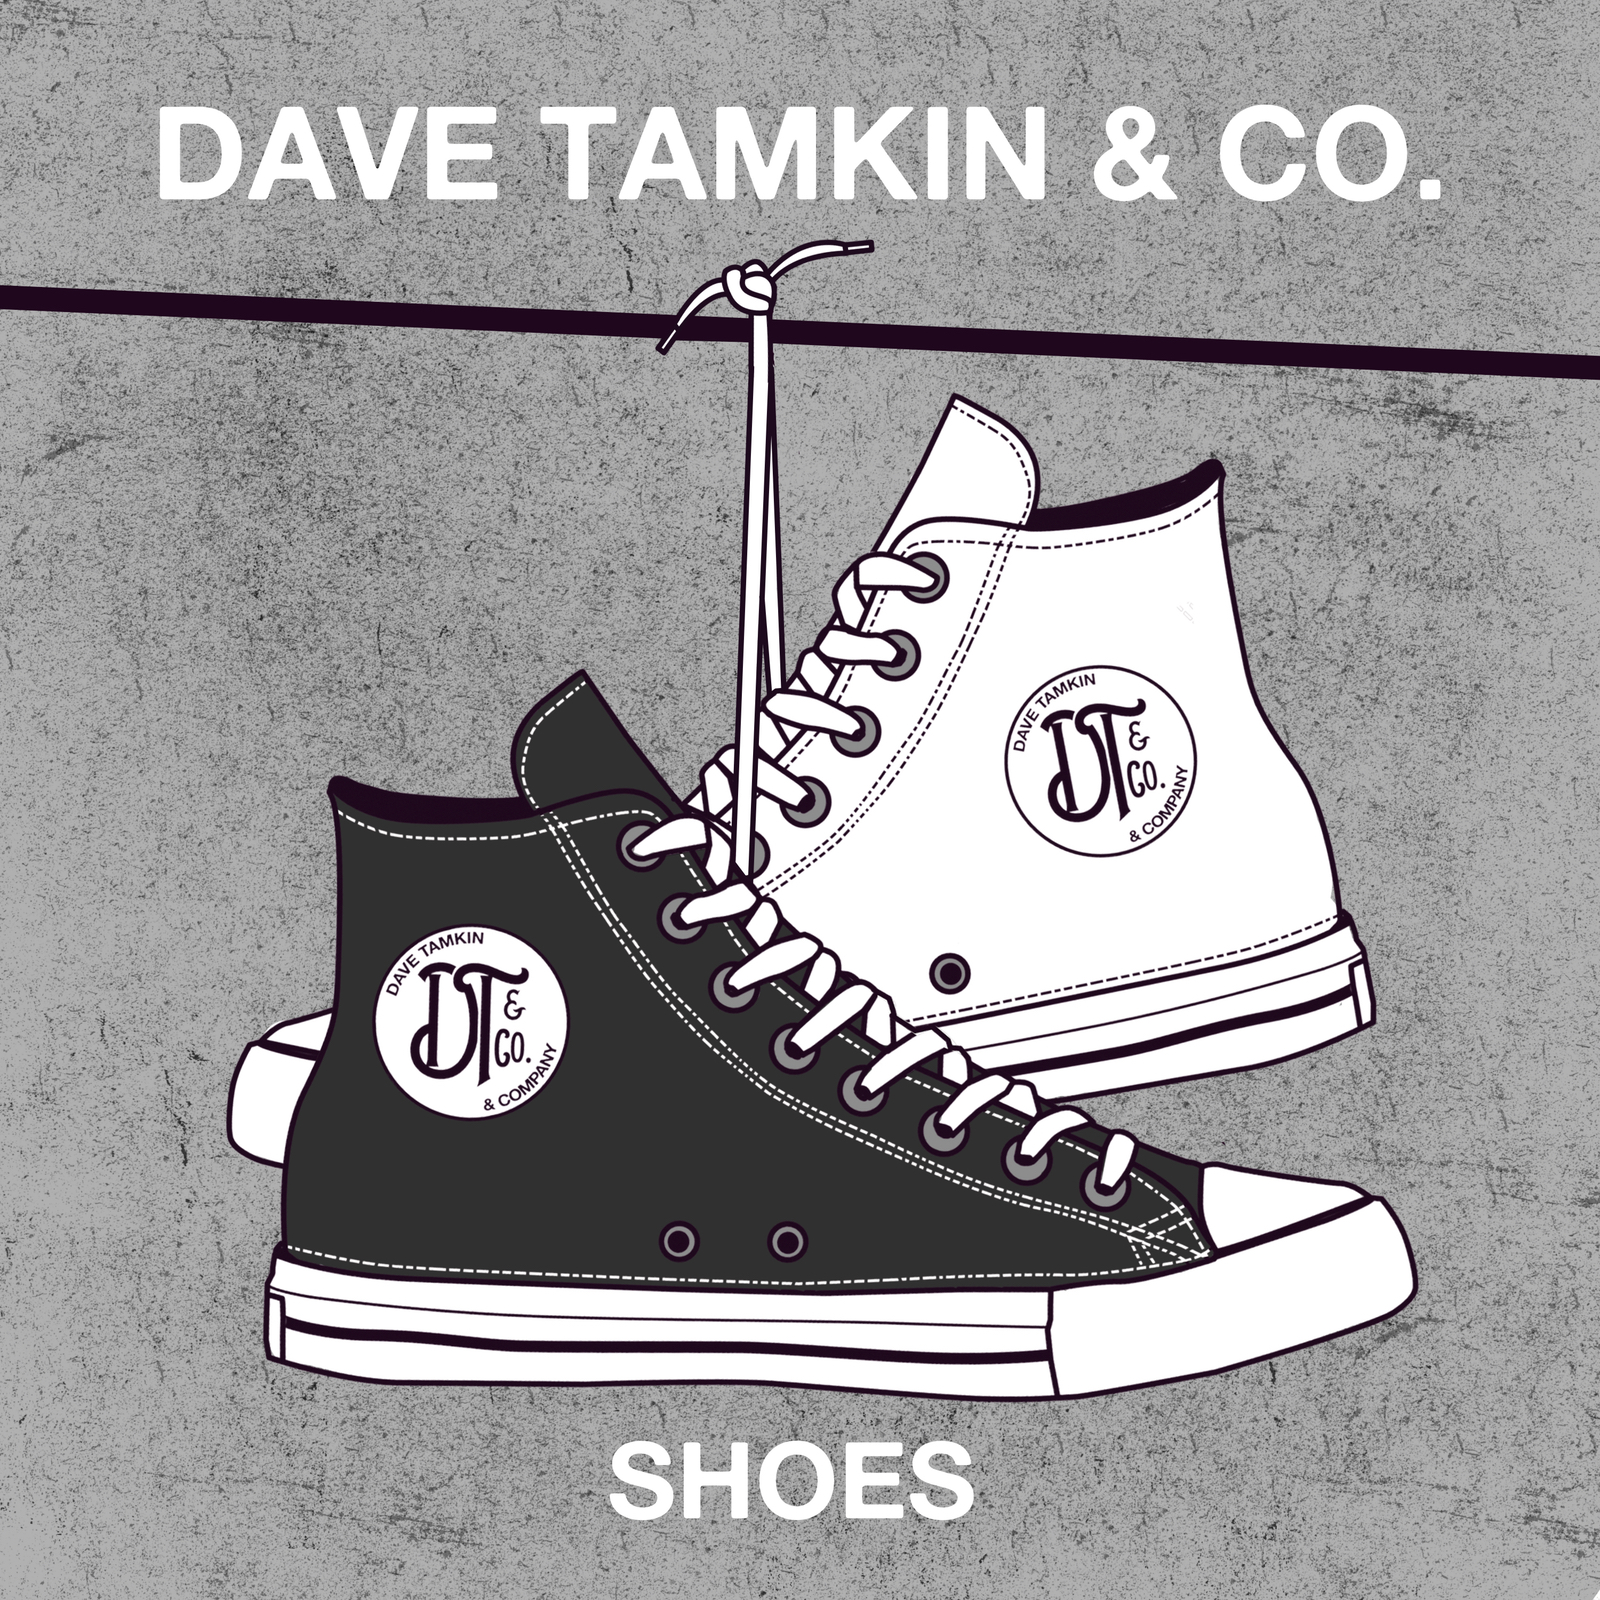 Dave Tamkin's "SHOES" Offers A Way to Help Others